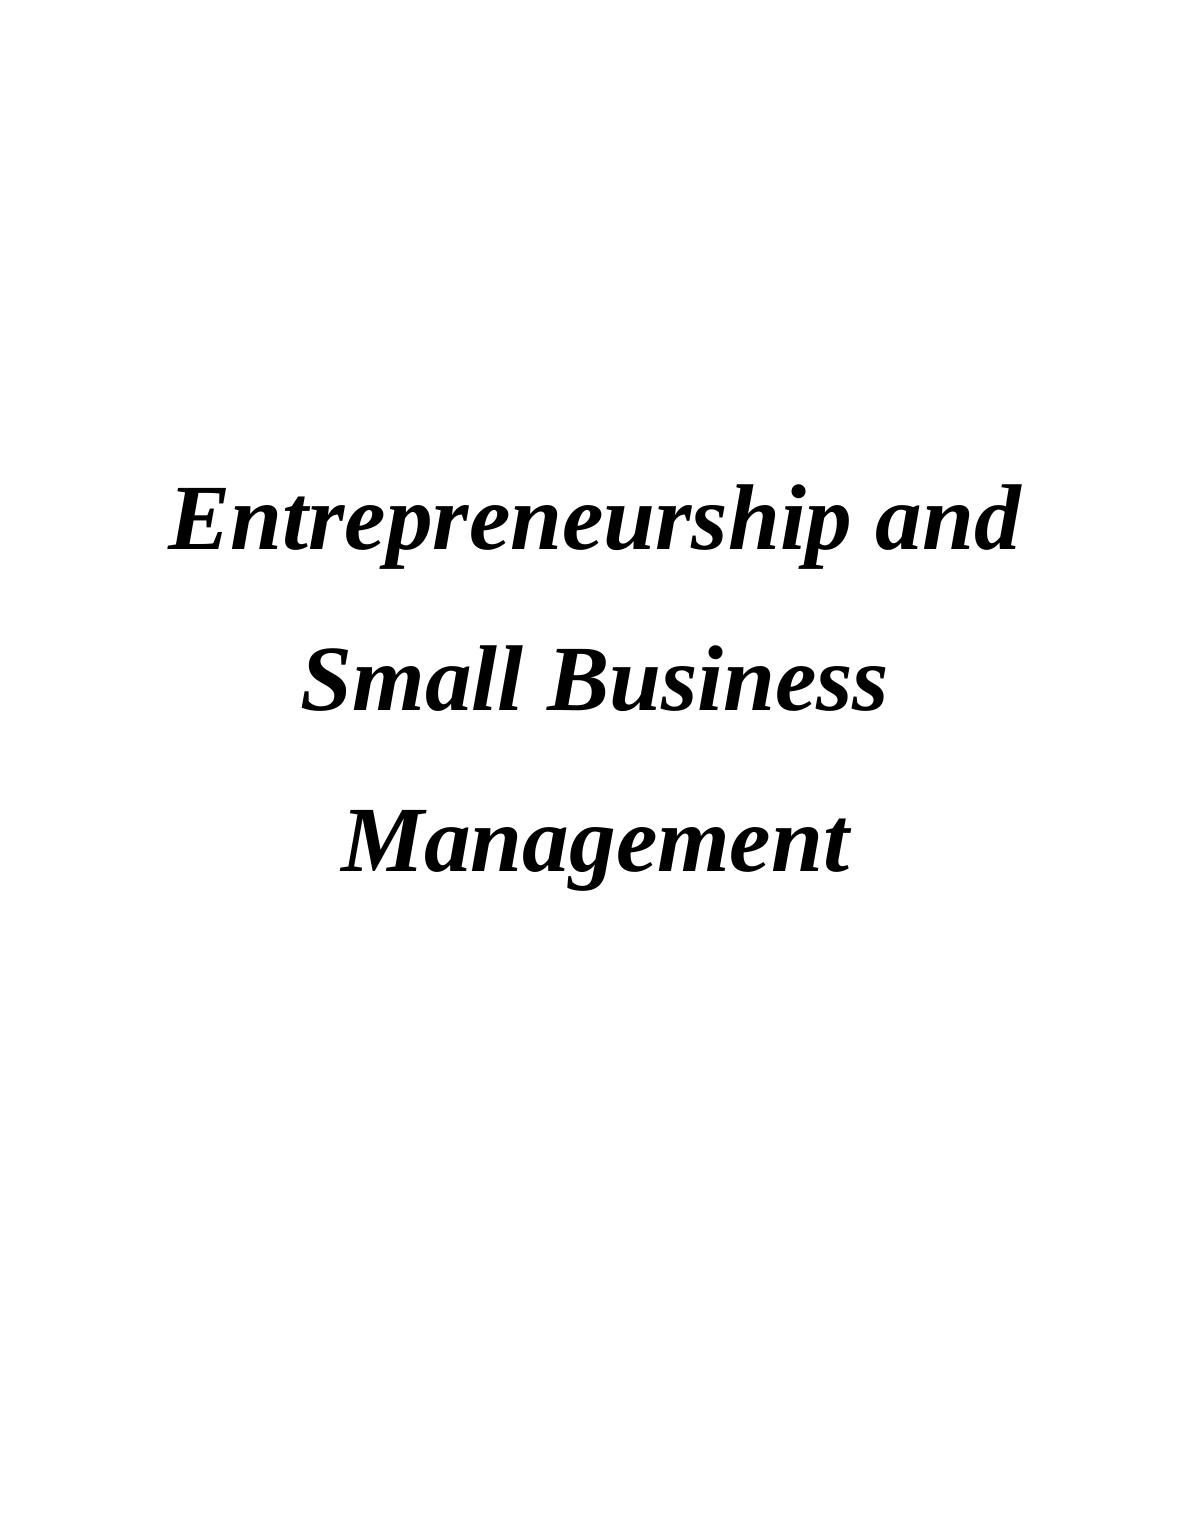 Entrepreneurship and a Small Business Management (pdf)_1